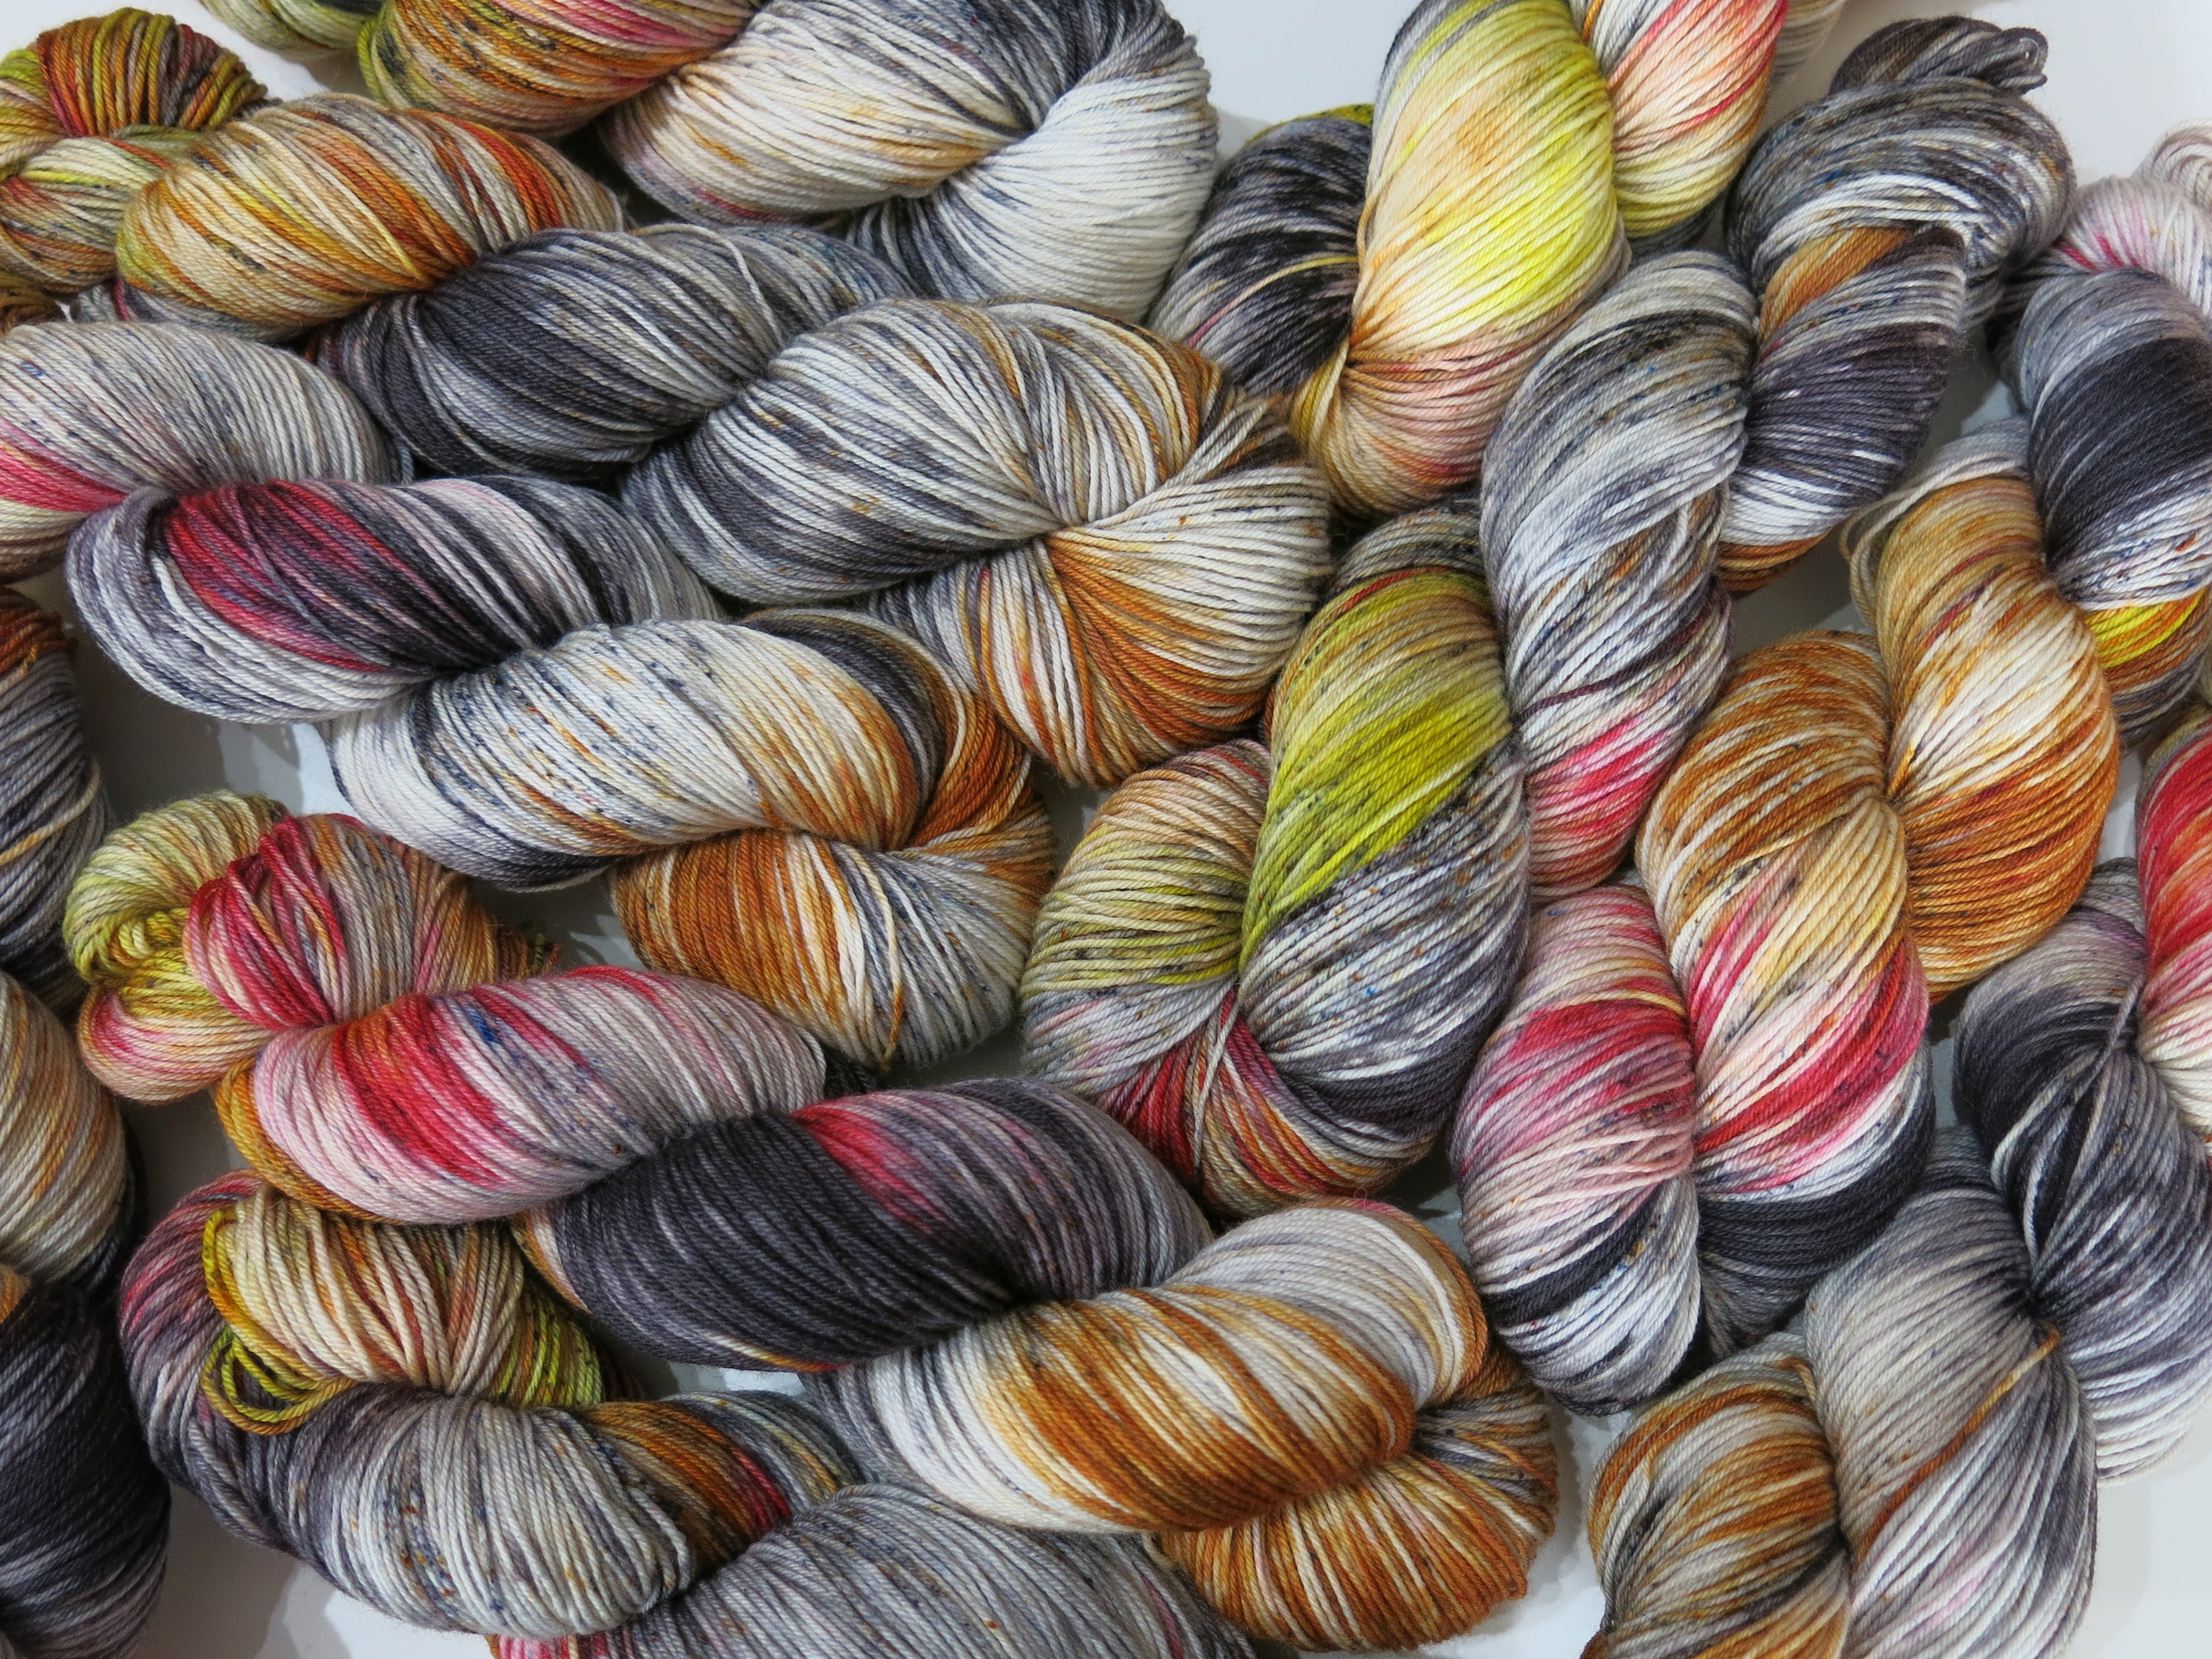 hand dyed yarn with black speckles and fire reds and yellows